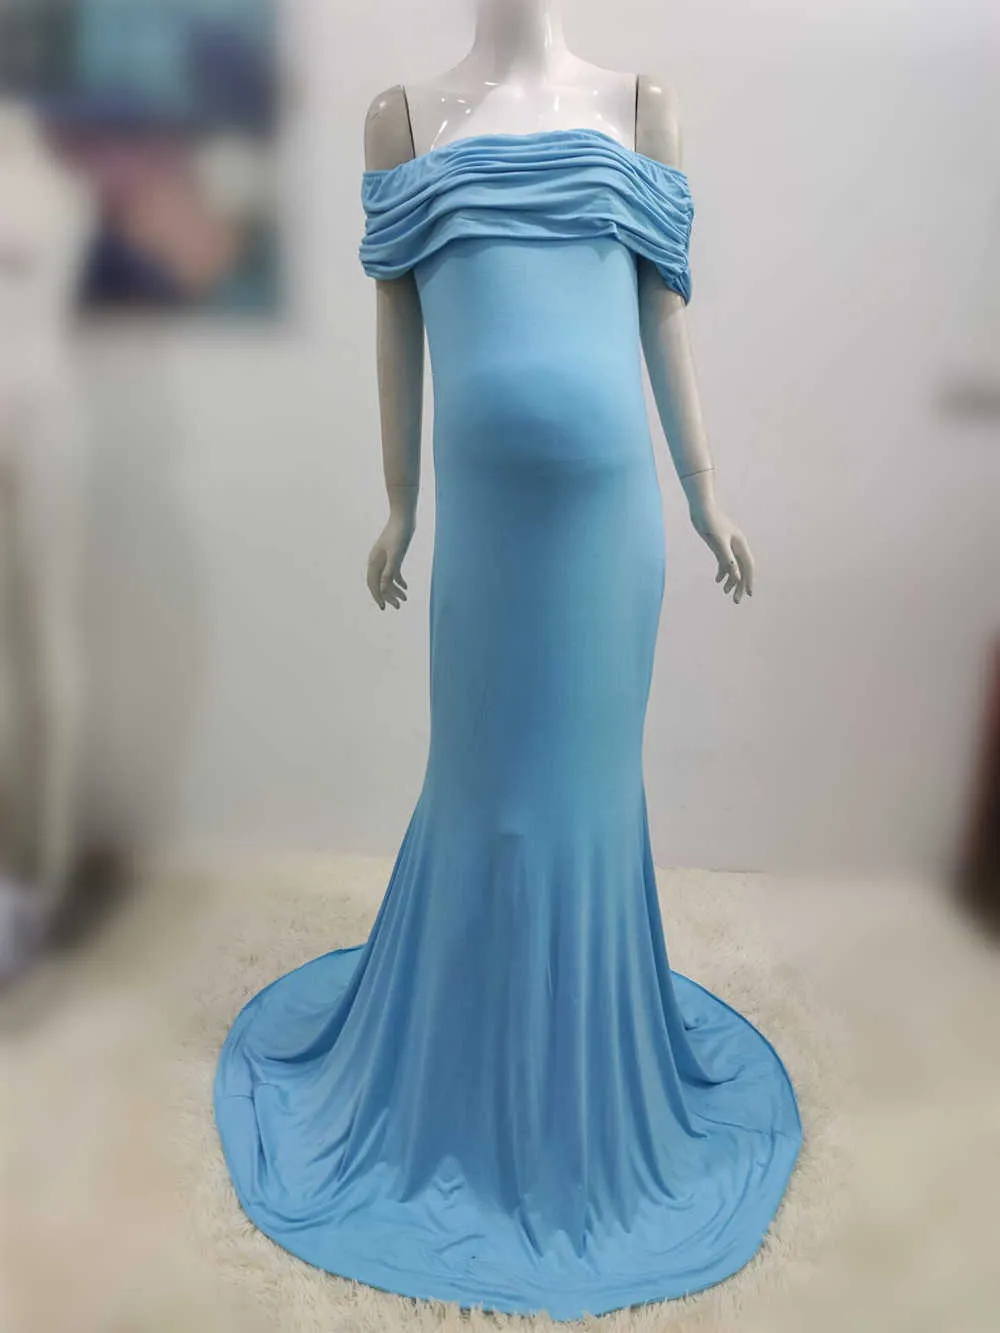 Shoulderless Maternity Dresses Photography Props Long Pregnancy Dress For Baby Shower Photo Shoots Pregnant Women Maxi Gown 2020 (7)